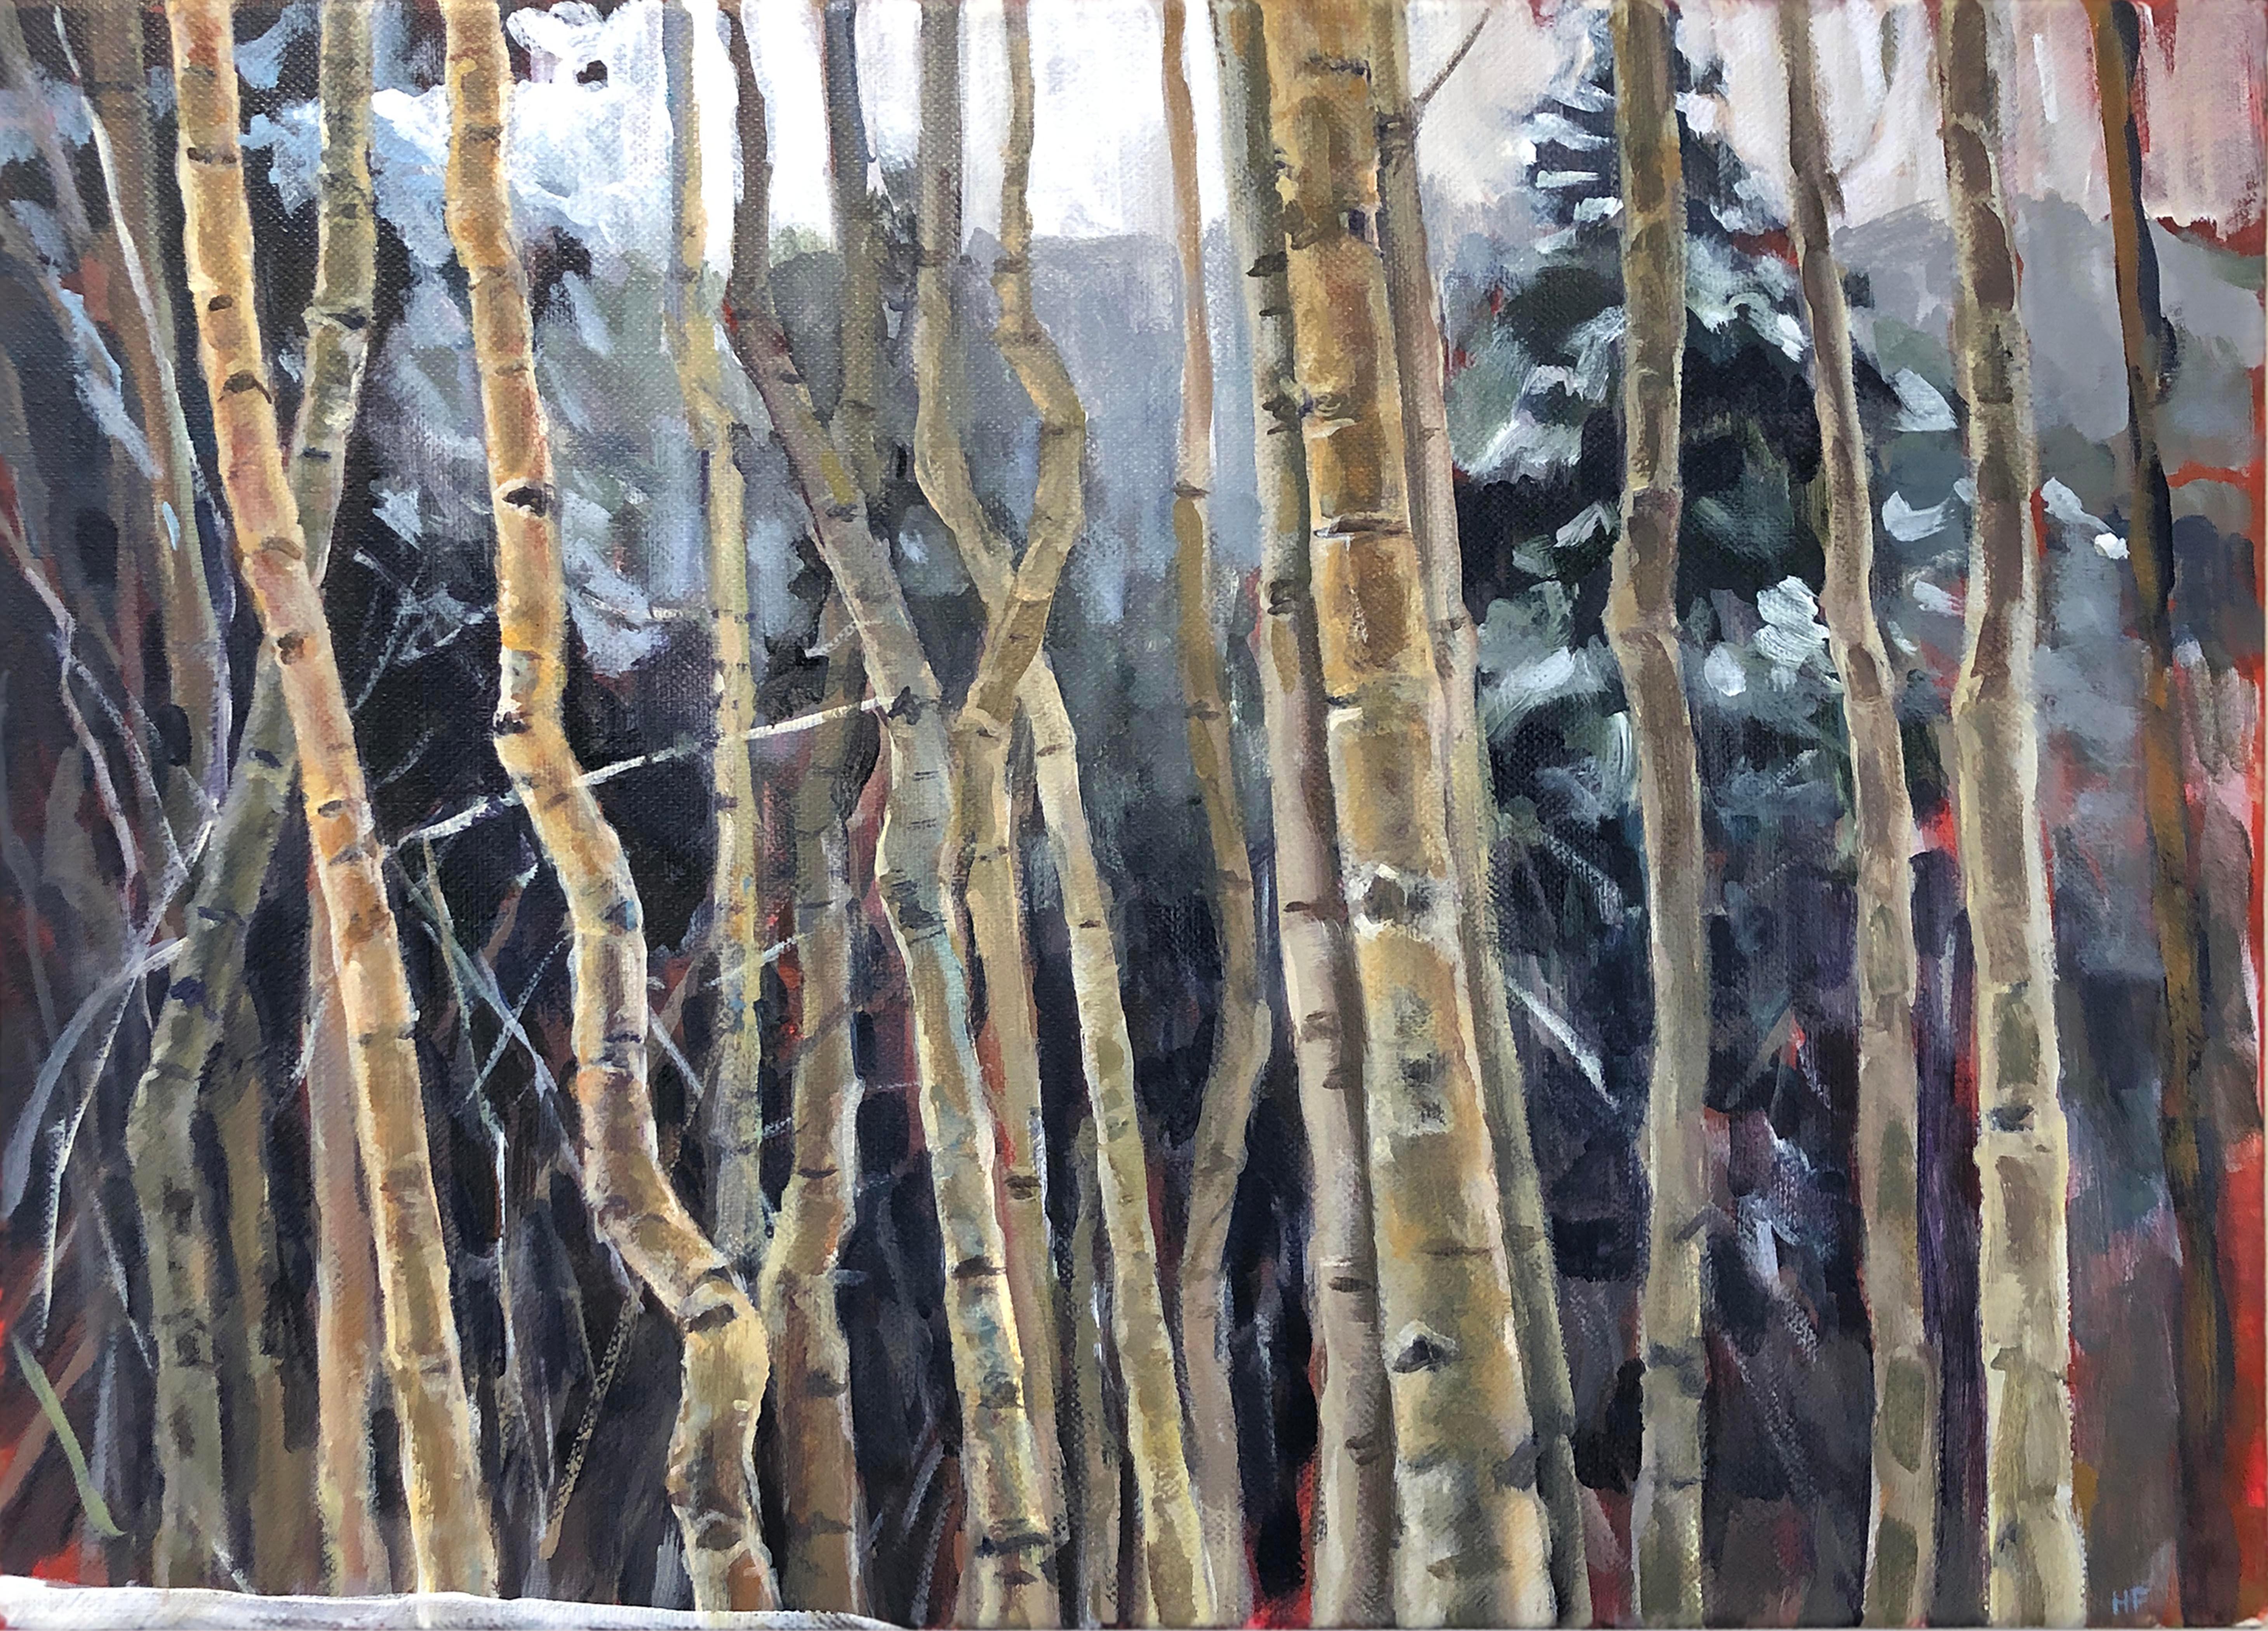 Aspens in Snow (Contemporary western landscape with snow dusted Aspen trees) - Painting by Heather Foster